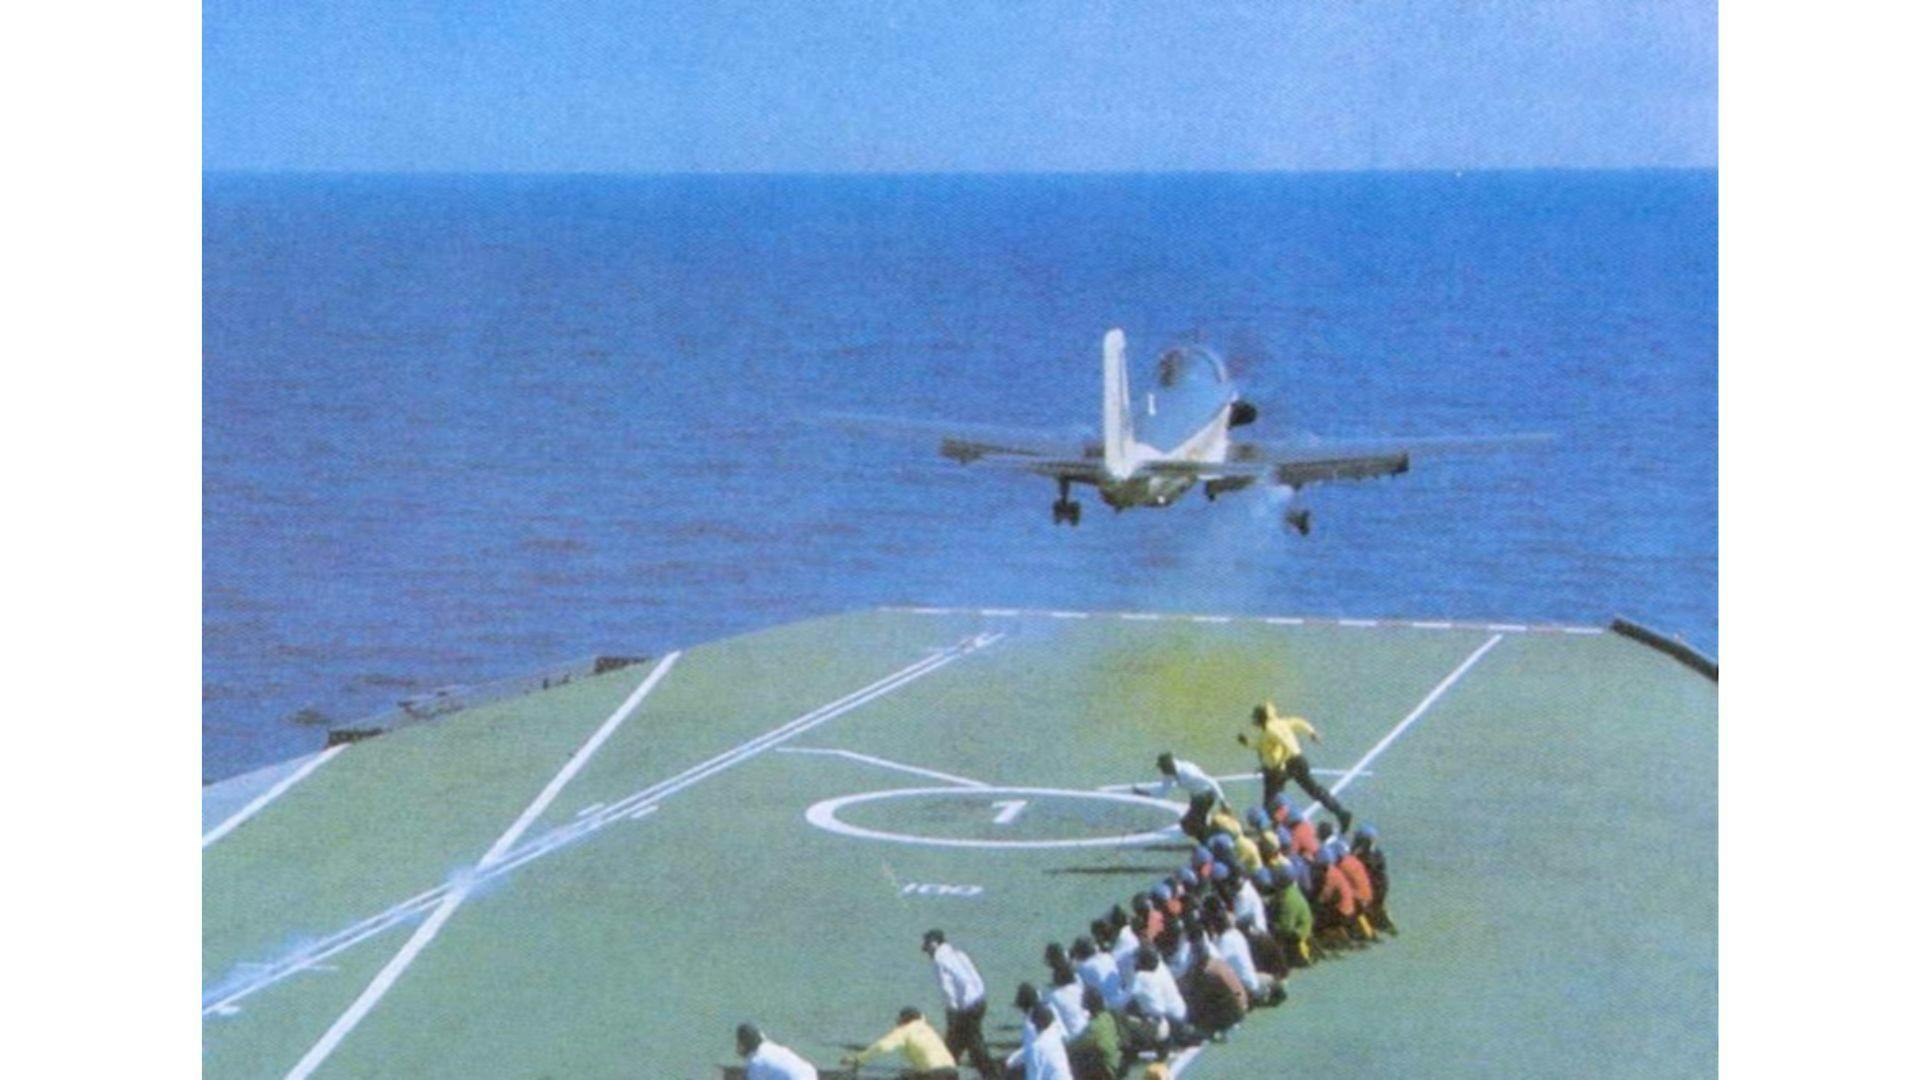 Breguet Alize anti-submarine aircraft taking off from Vikrant